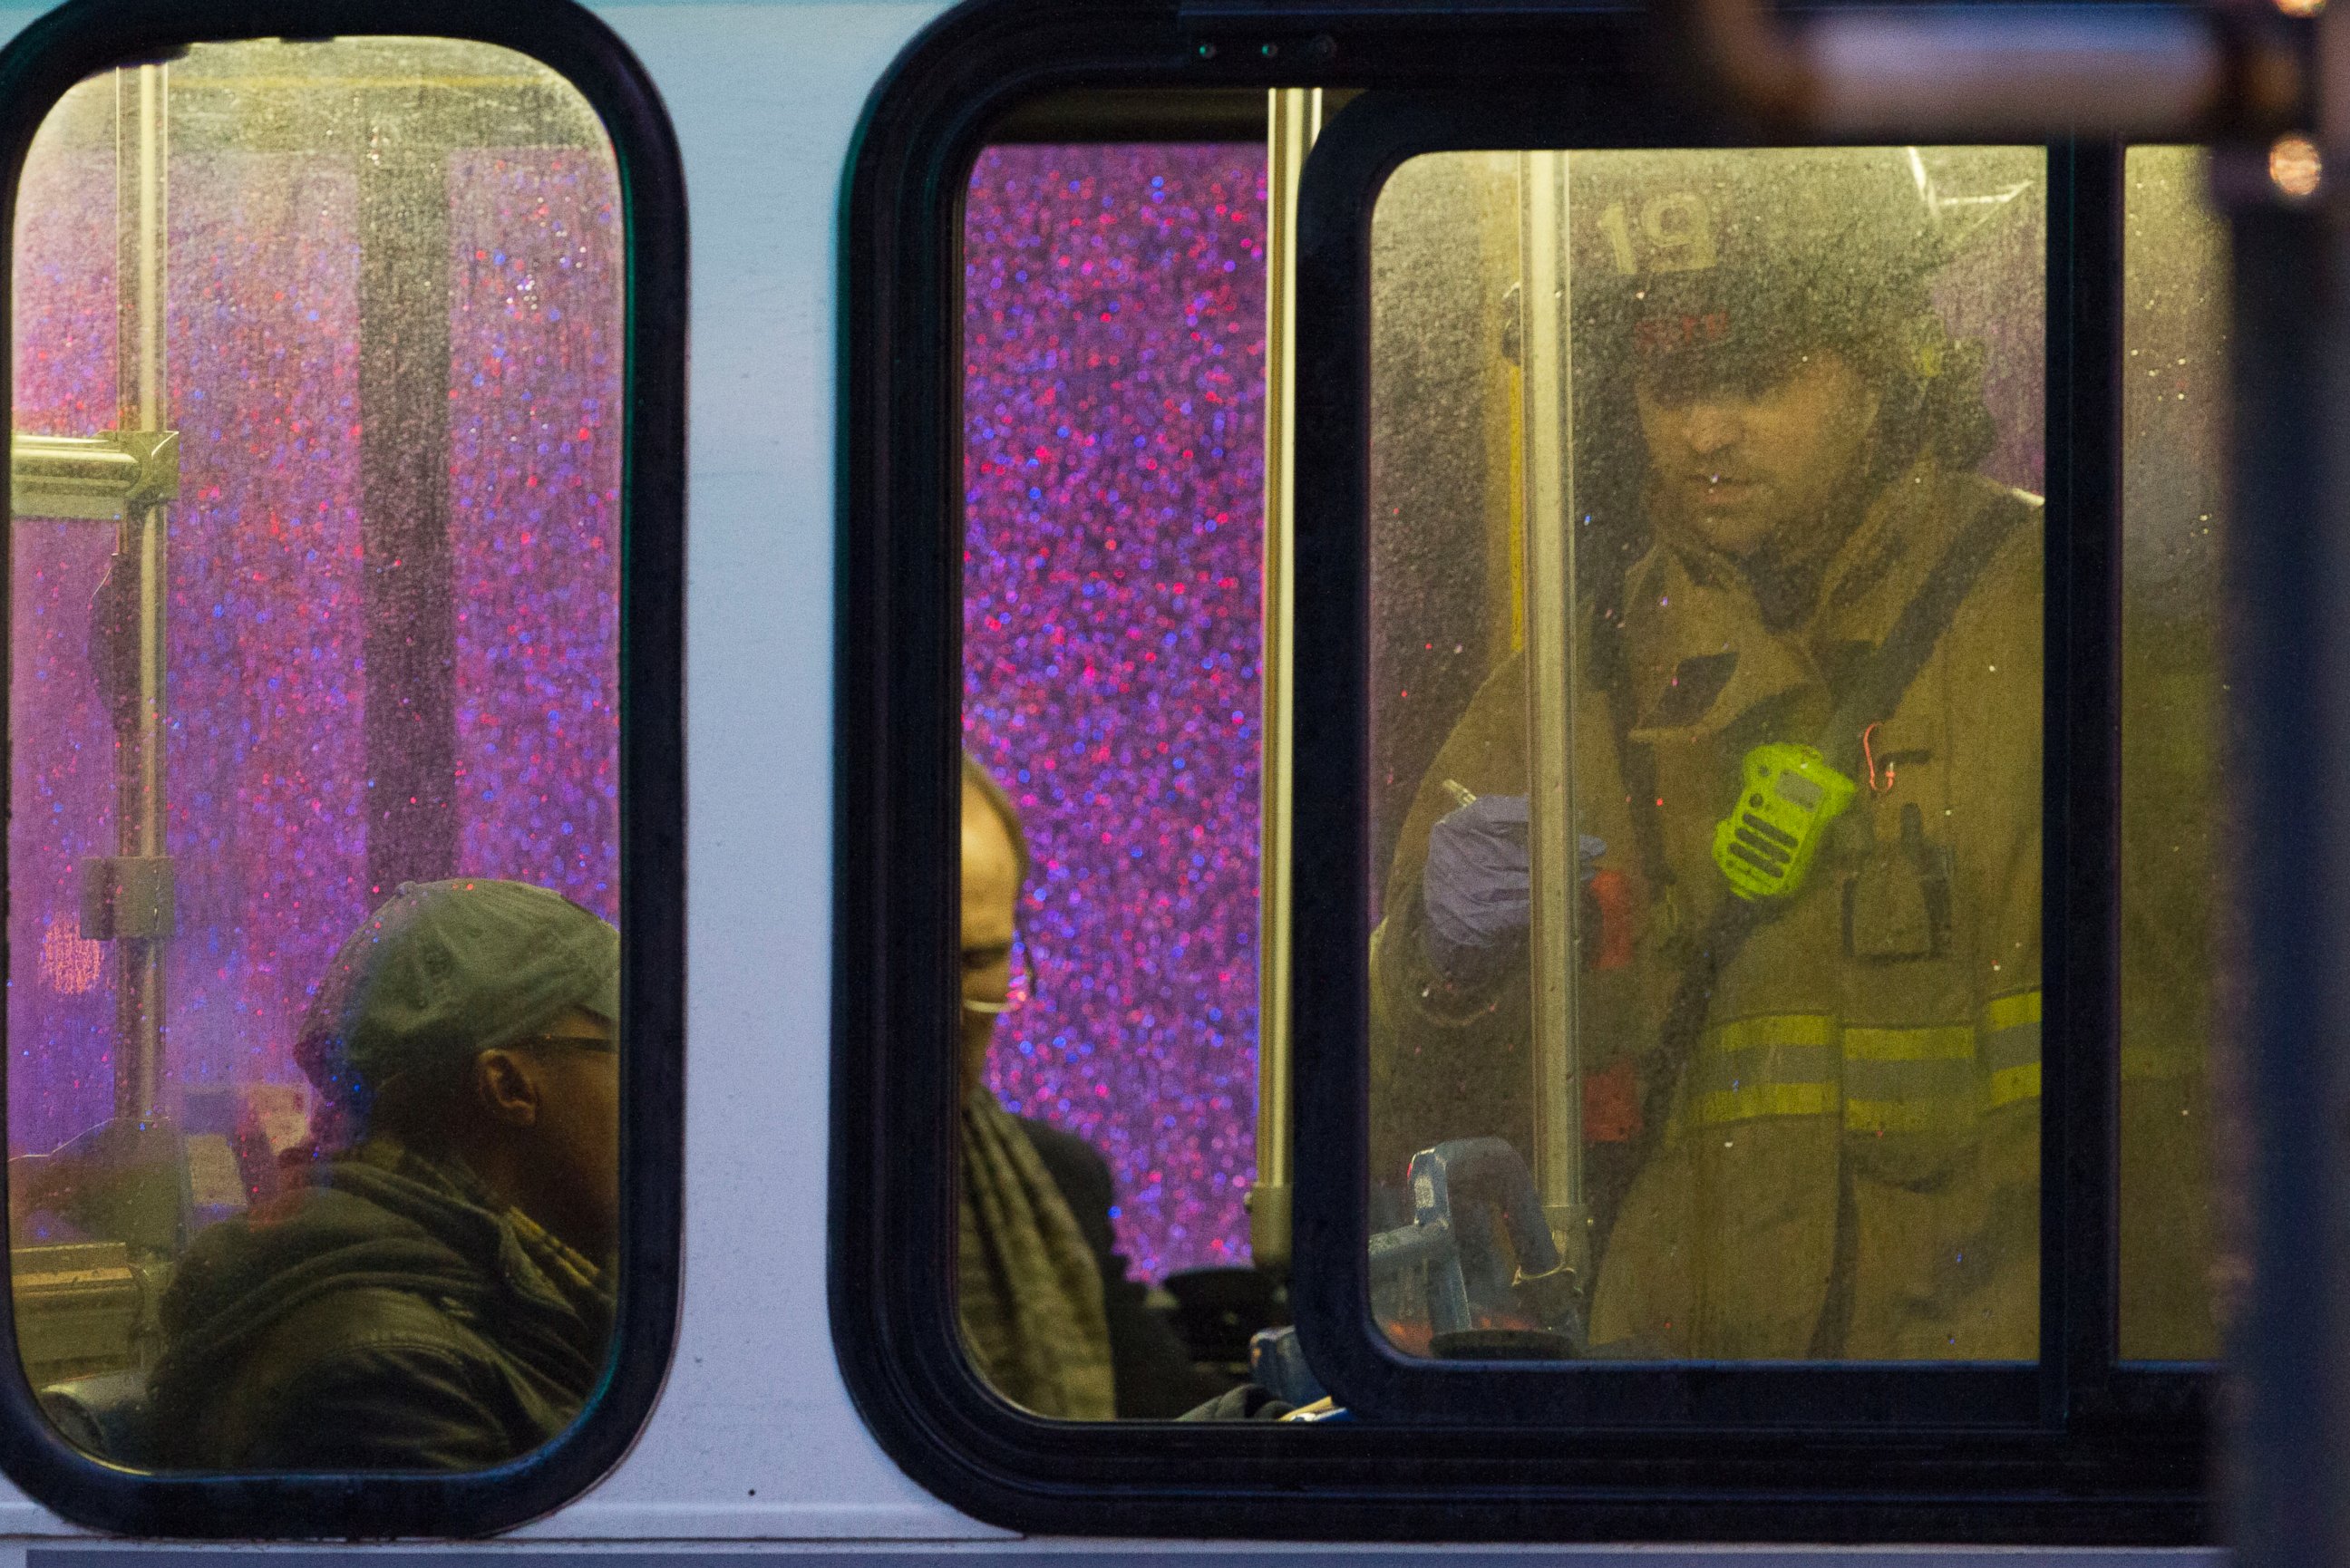 PHOTO: A firefighter attends people on a bus to assess triage needs after people were evacuated from a smoke filled Metro subway tunnel in Washington, Jan. 12, 2015.